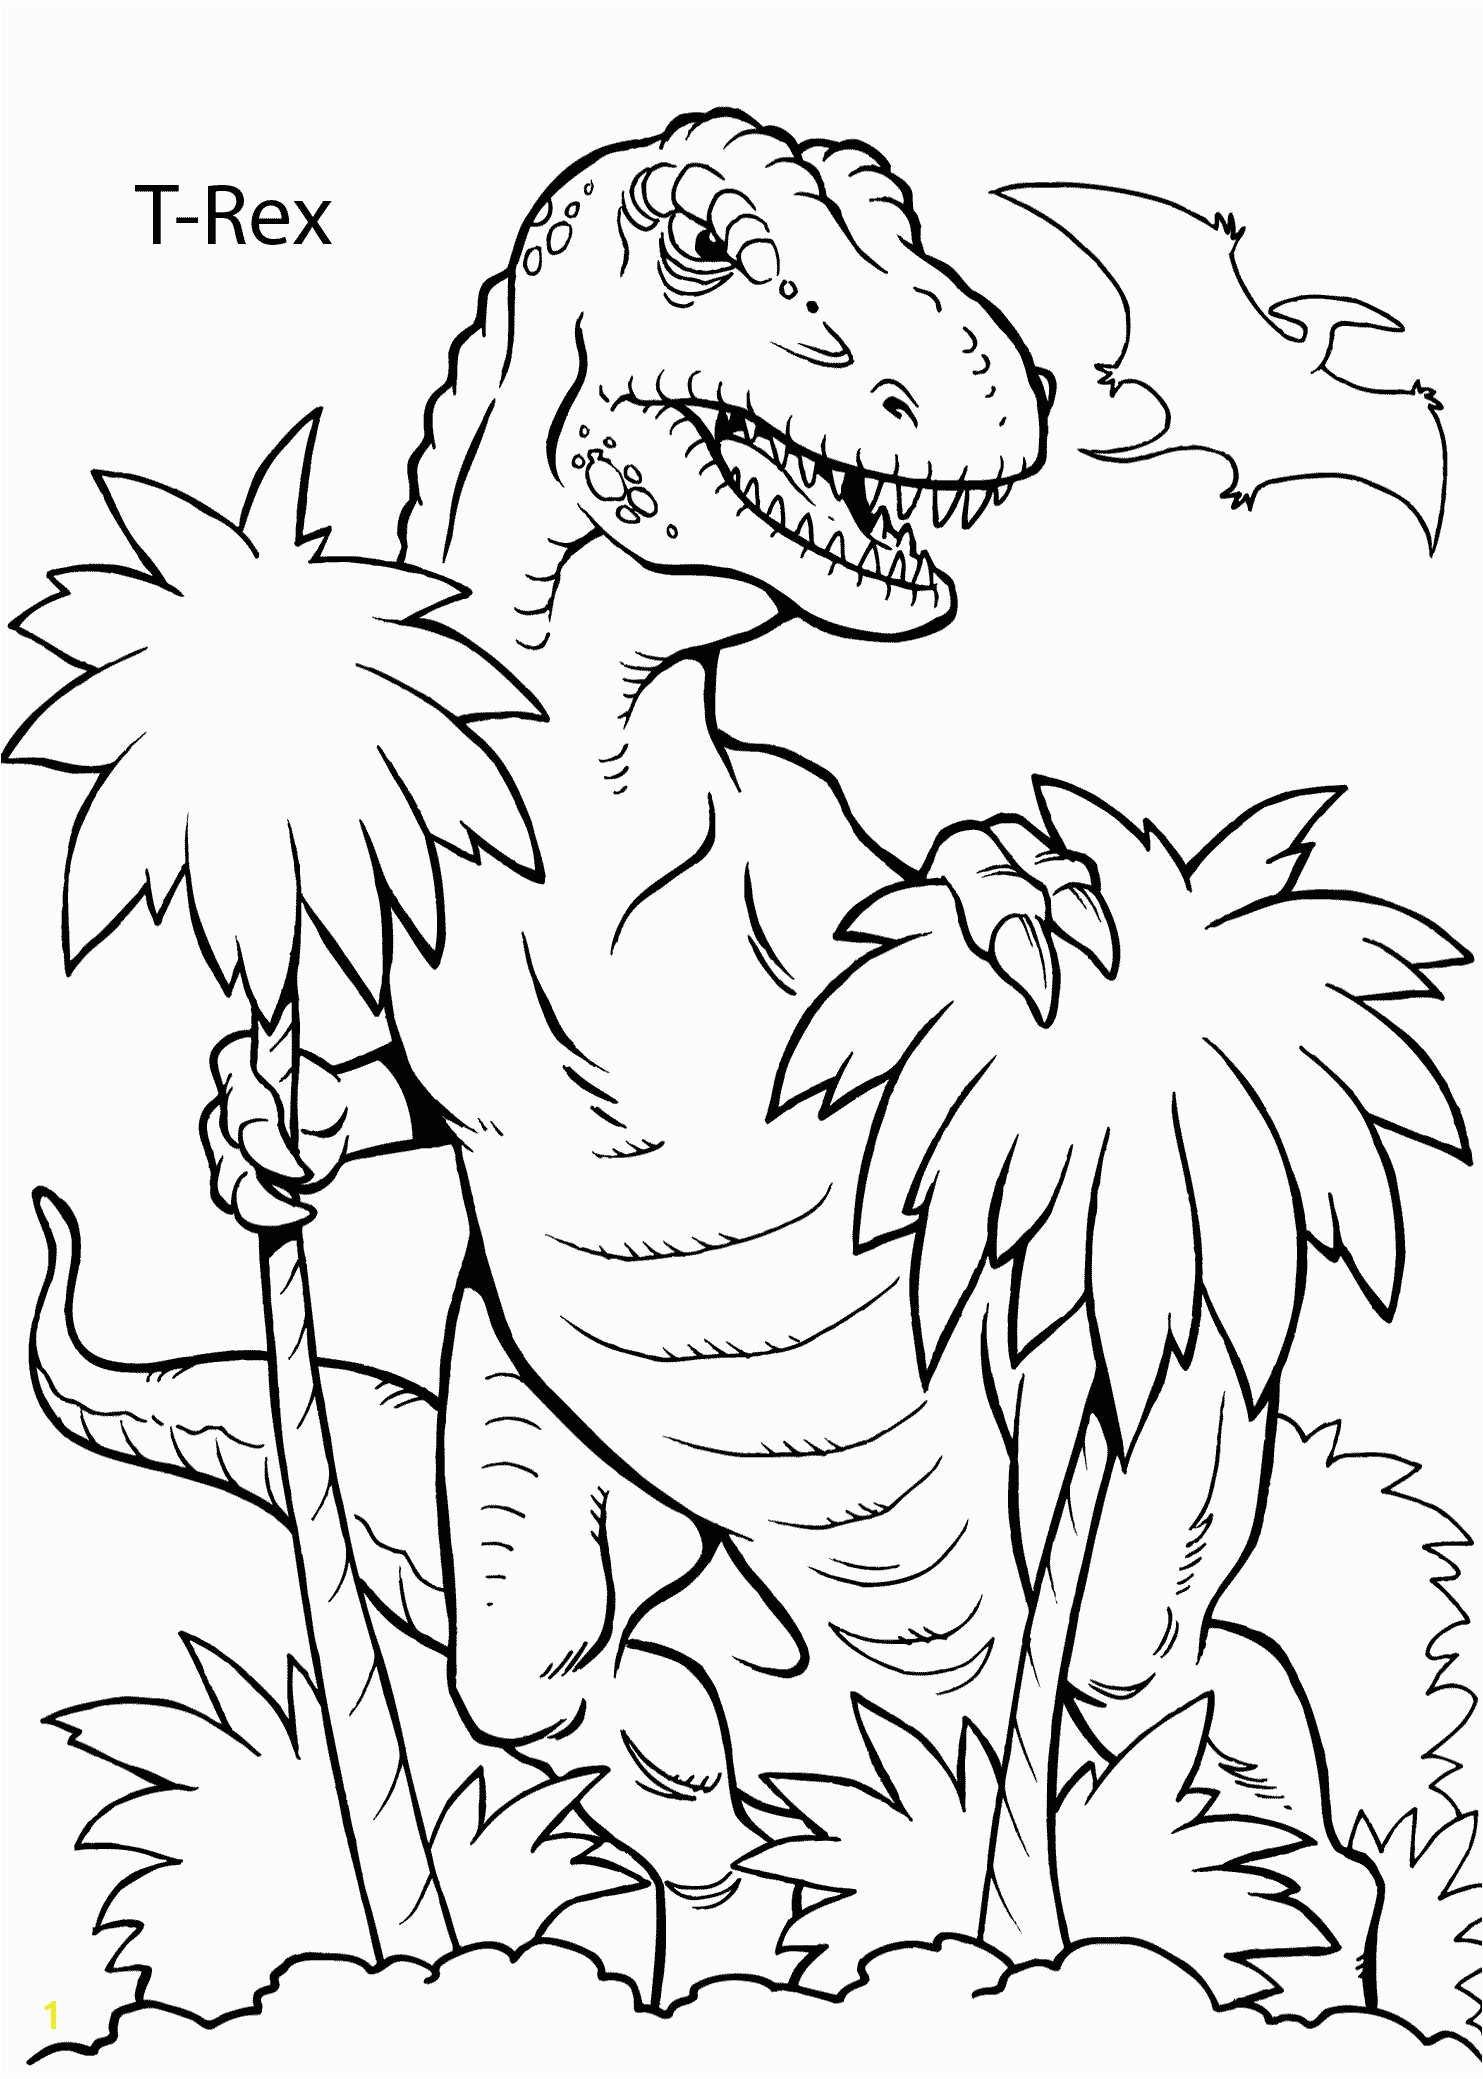 T Rex Coloring Pages T Rex Dinosaur Coloring Pages for Kids Printable Free